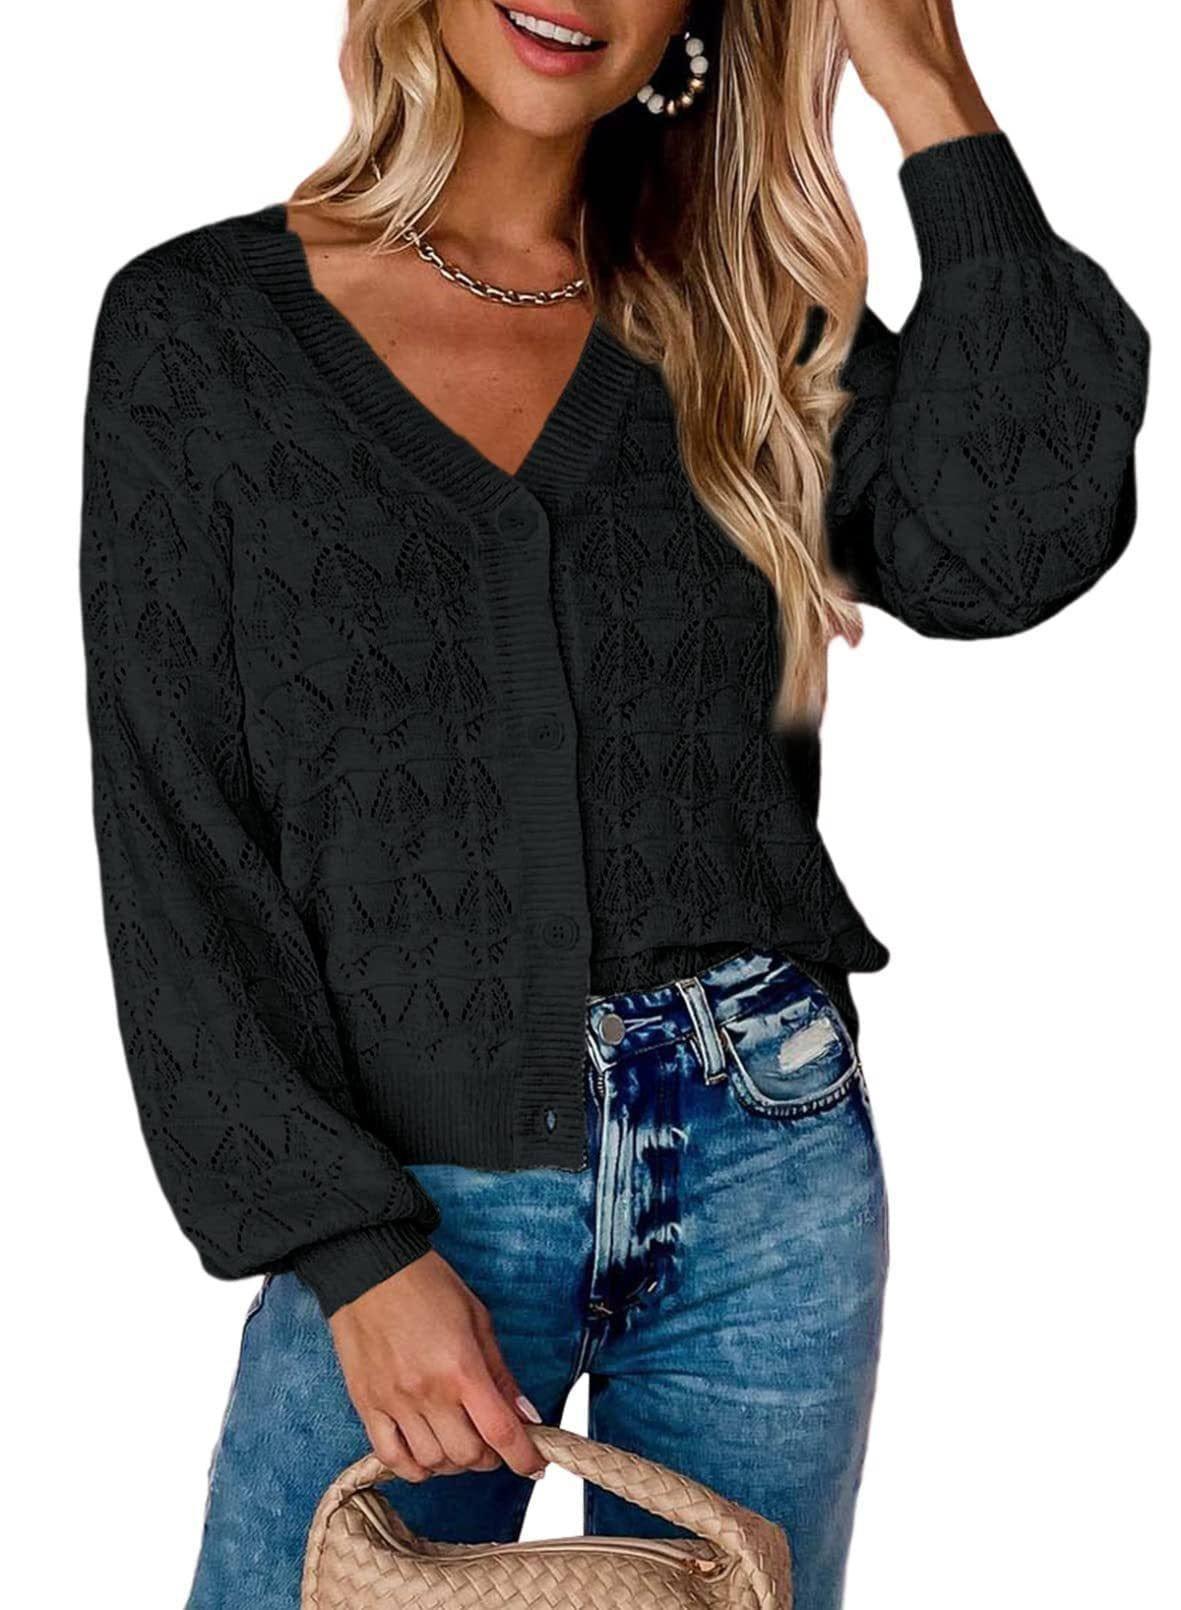 Fashion Short Cardigan Knitted Sweaters Women Autumn And-Black-7